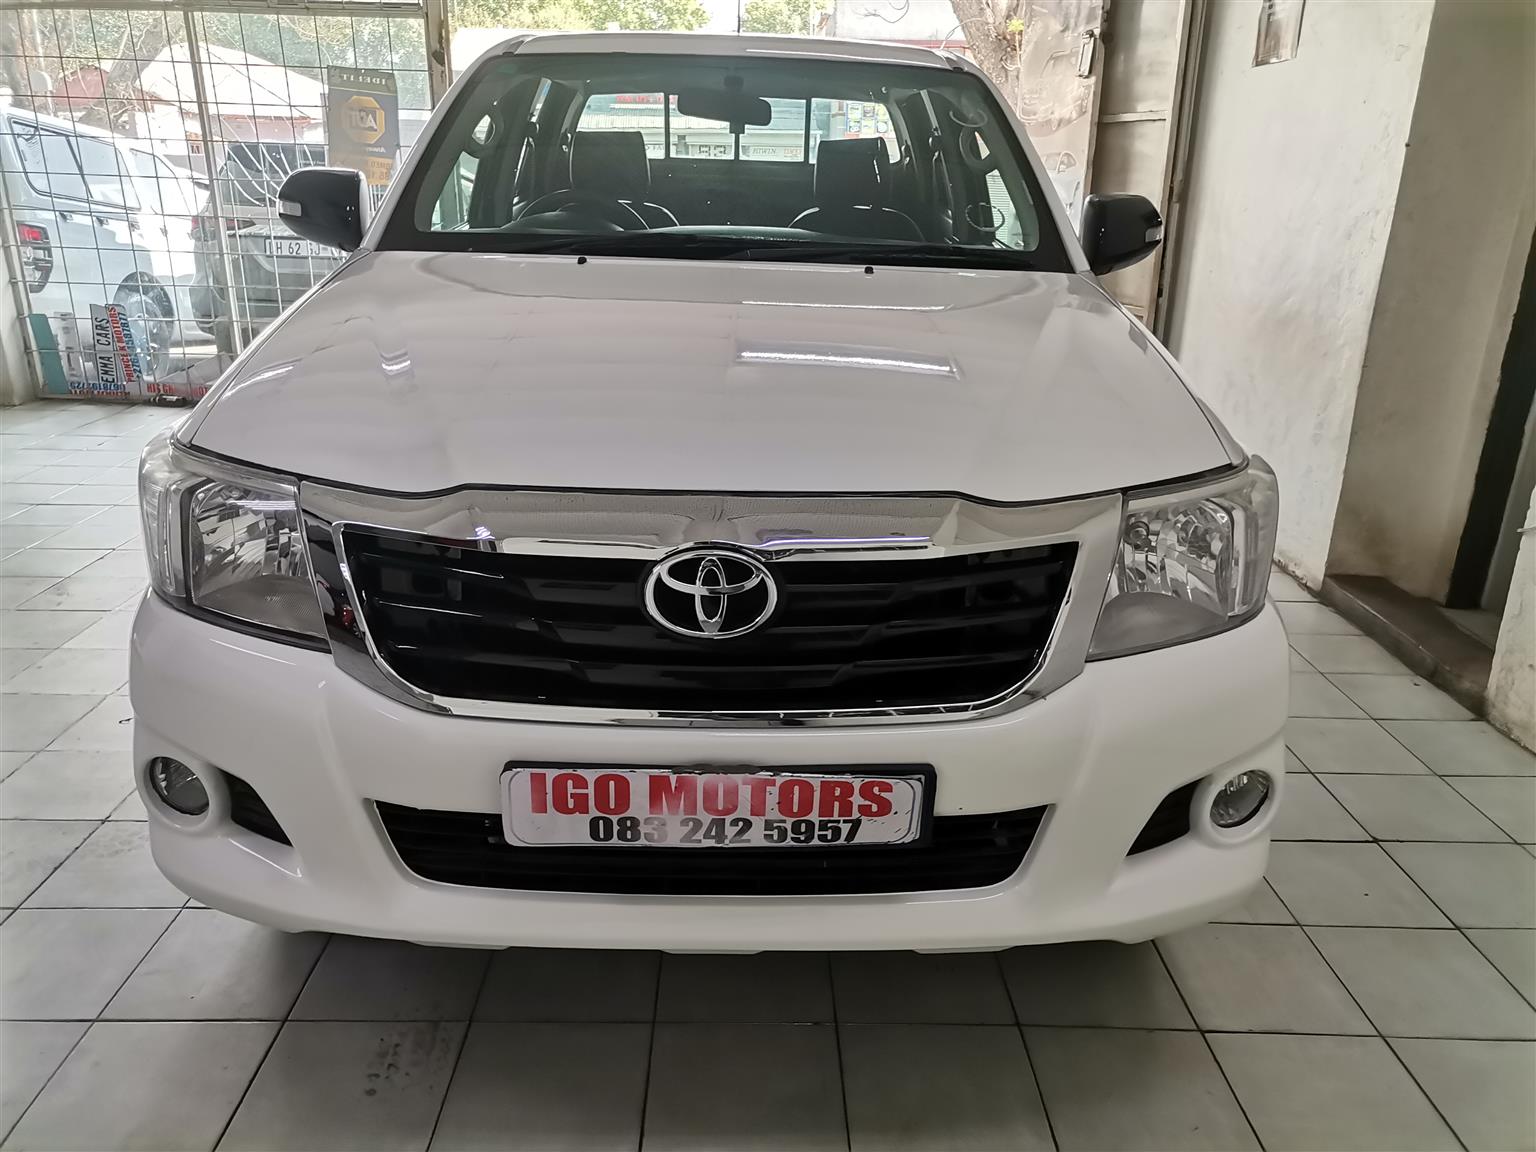 2015 Toyota Hilux 2.5D4D 4x4 Double Cab Manual Mechanically perfect